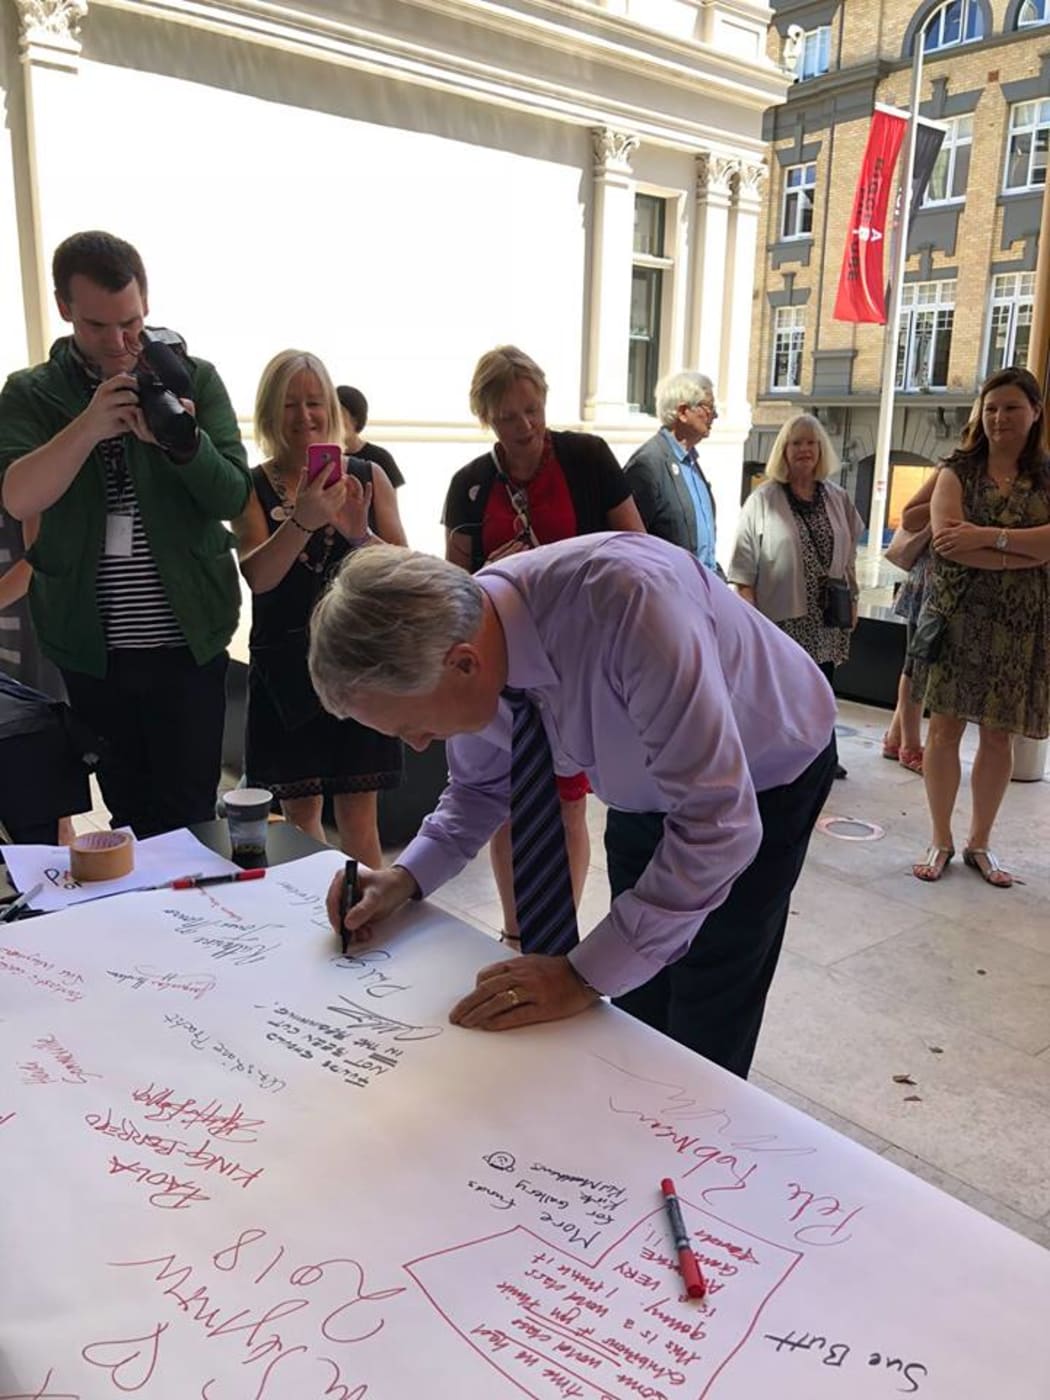 Auckland Mayor Phil Goff signing the Auckland Art Gallery Scroll